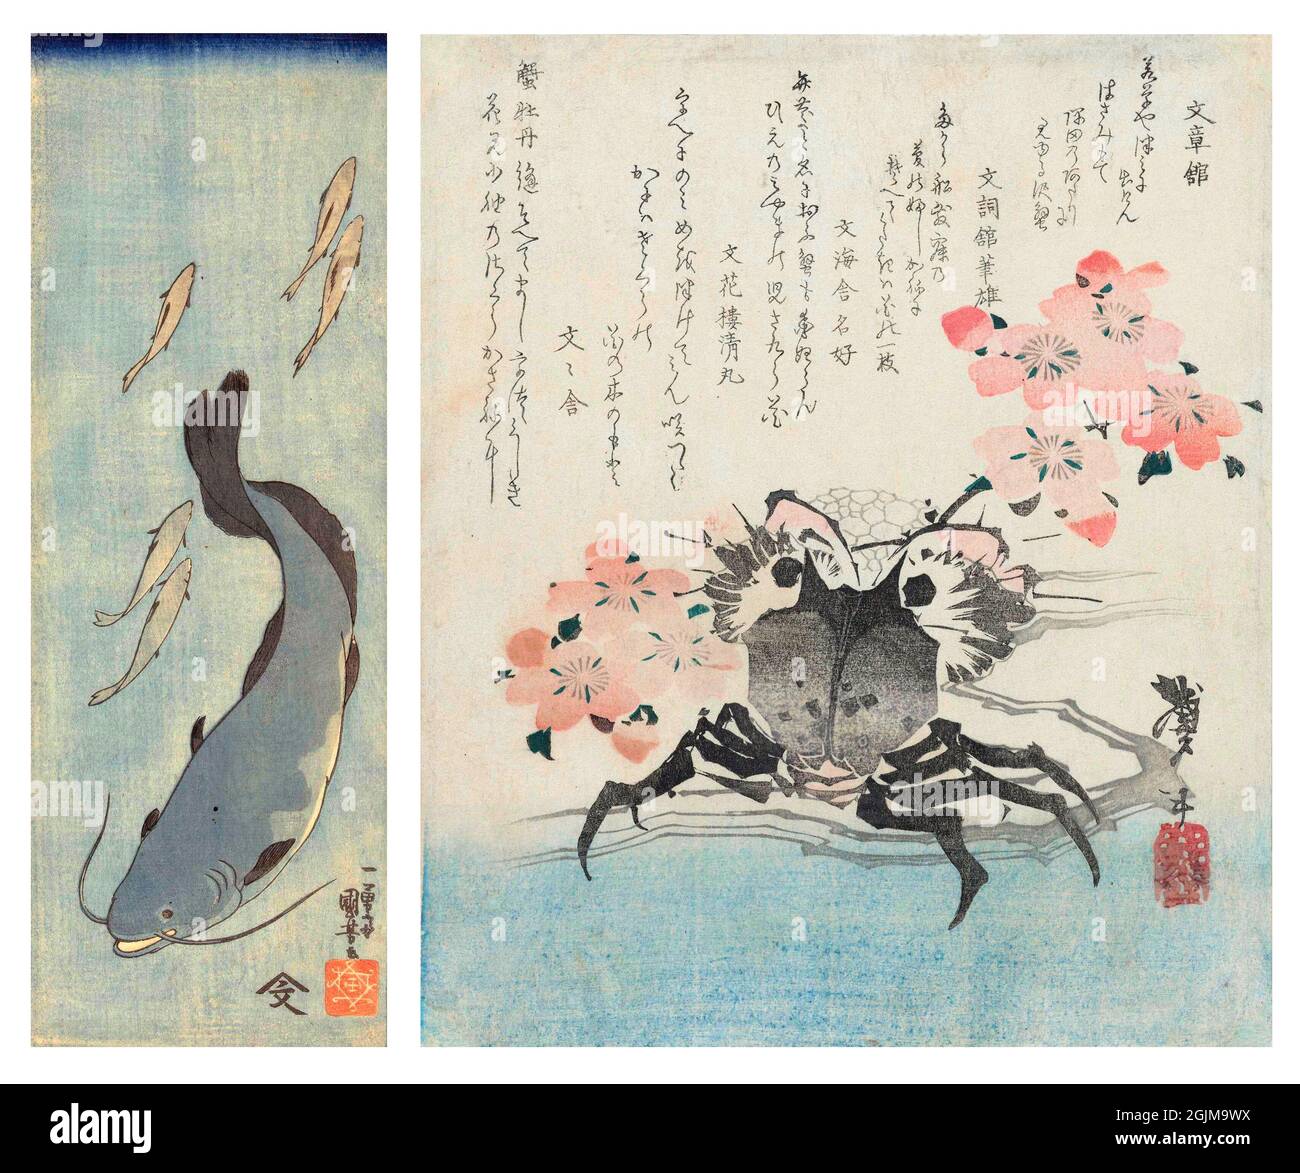 Selection of 2 Japanese painted woodcuts. Left: Catfish and five trout. Right: Crab amid cherry blossom. The crab is the emblem of the poet Bunbunsha Kanikomaru. Unique optimised and enhanced arrangement of two nineteenth century Japanese woodcut illustrations. Stock Photo